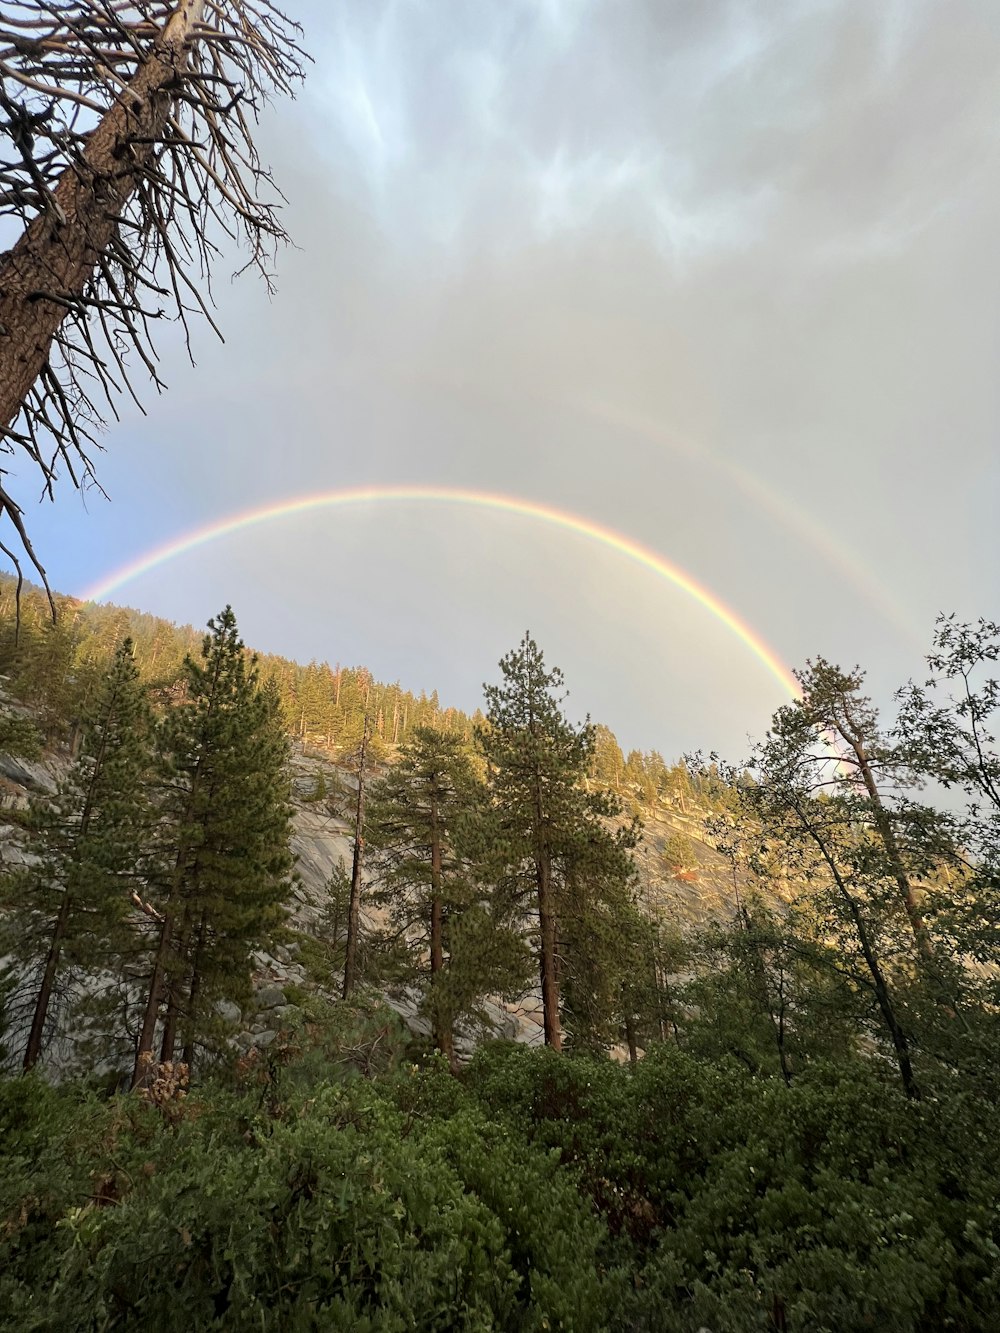 a double rainbow in the sky over a forest